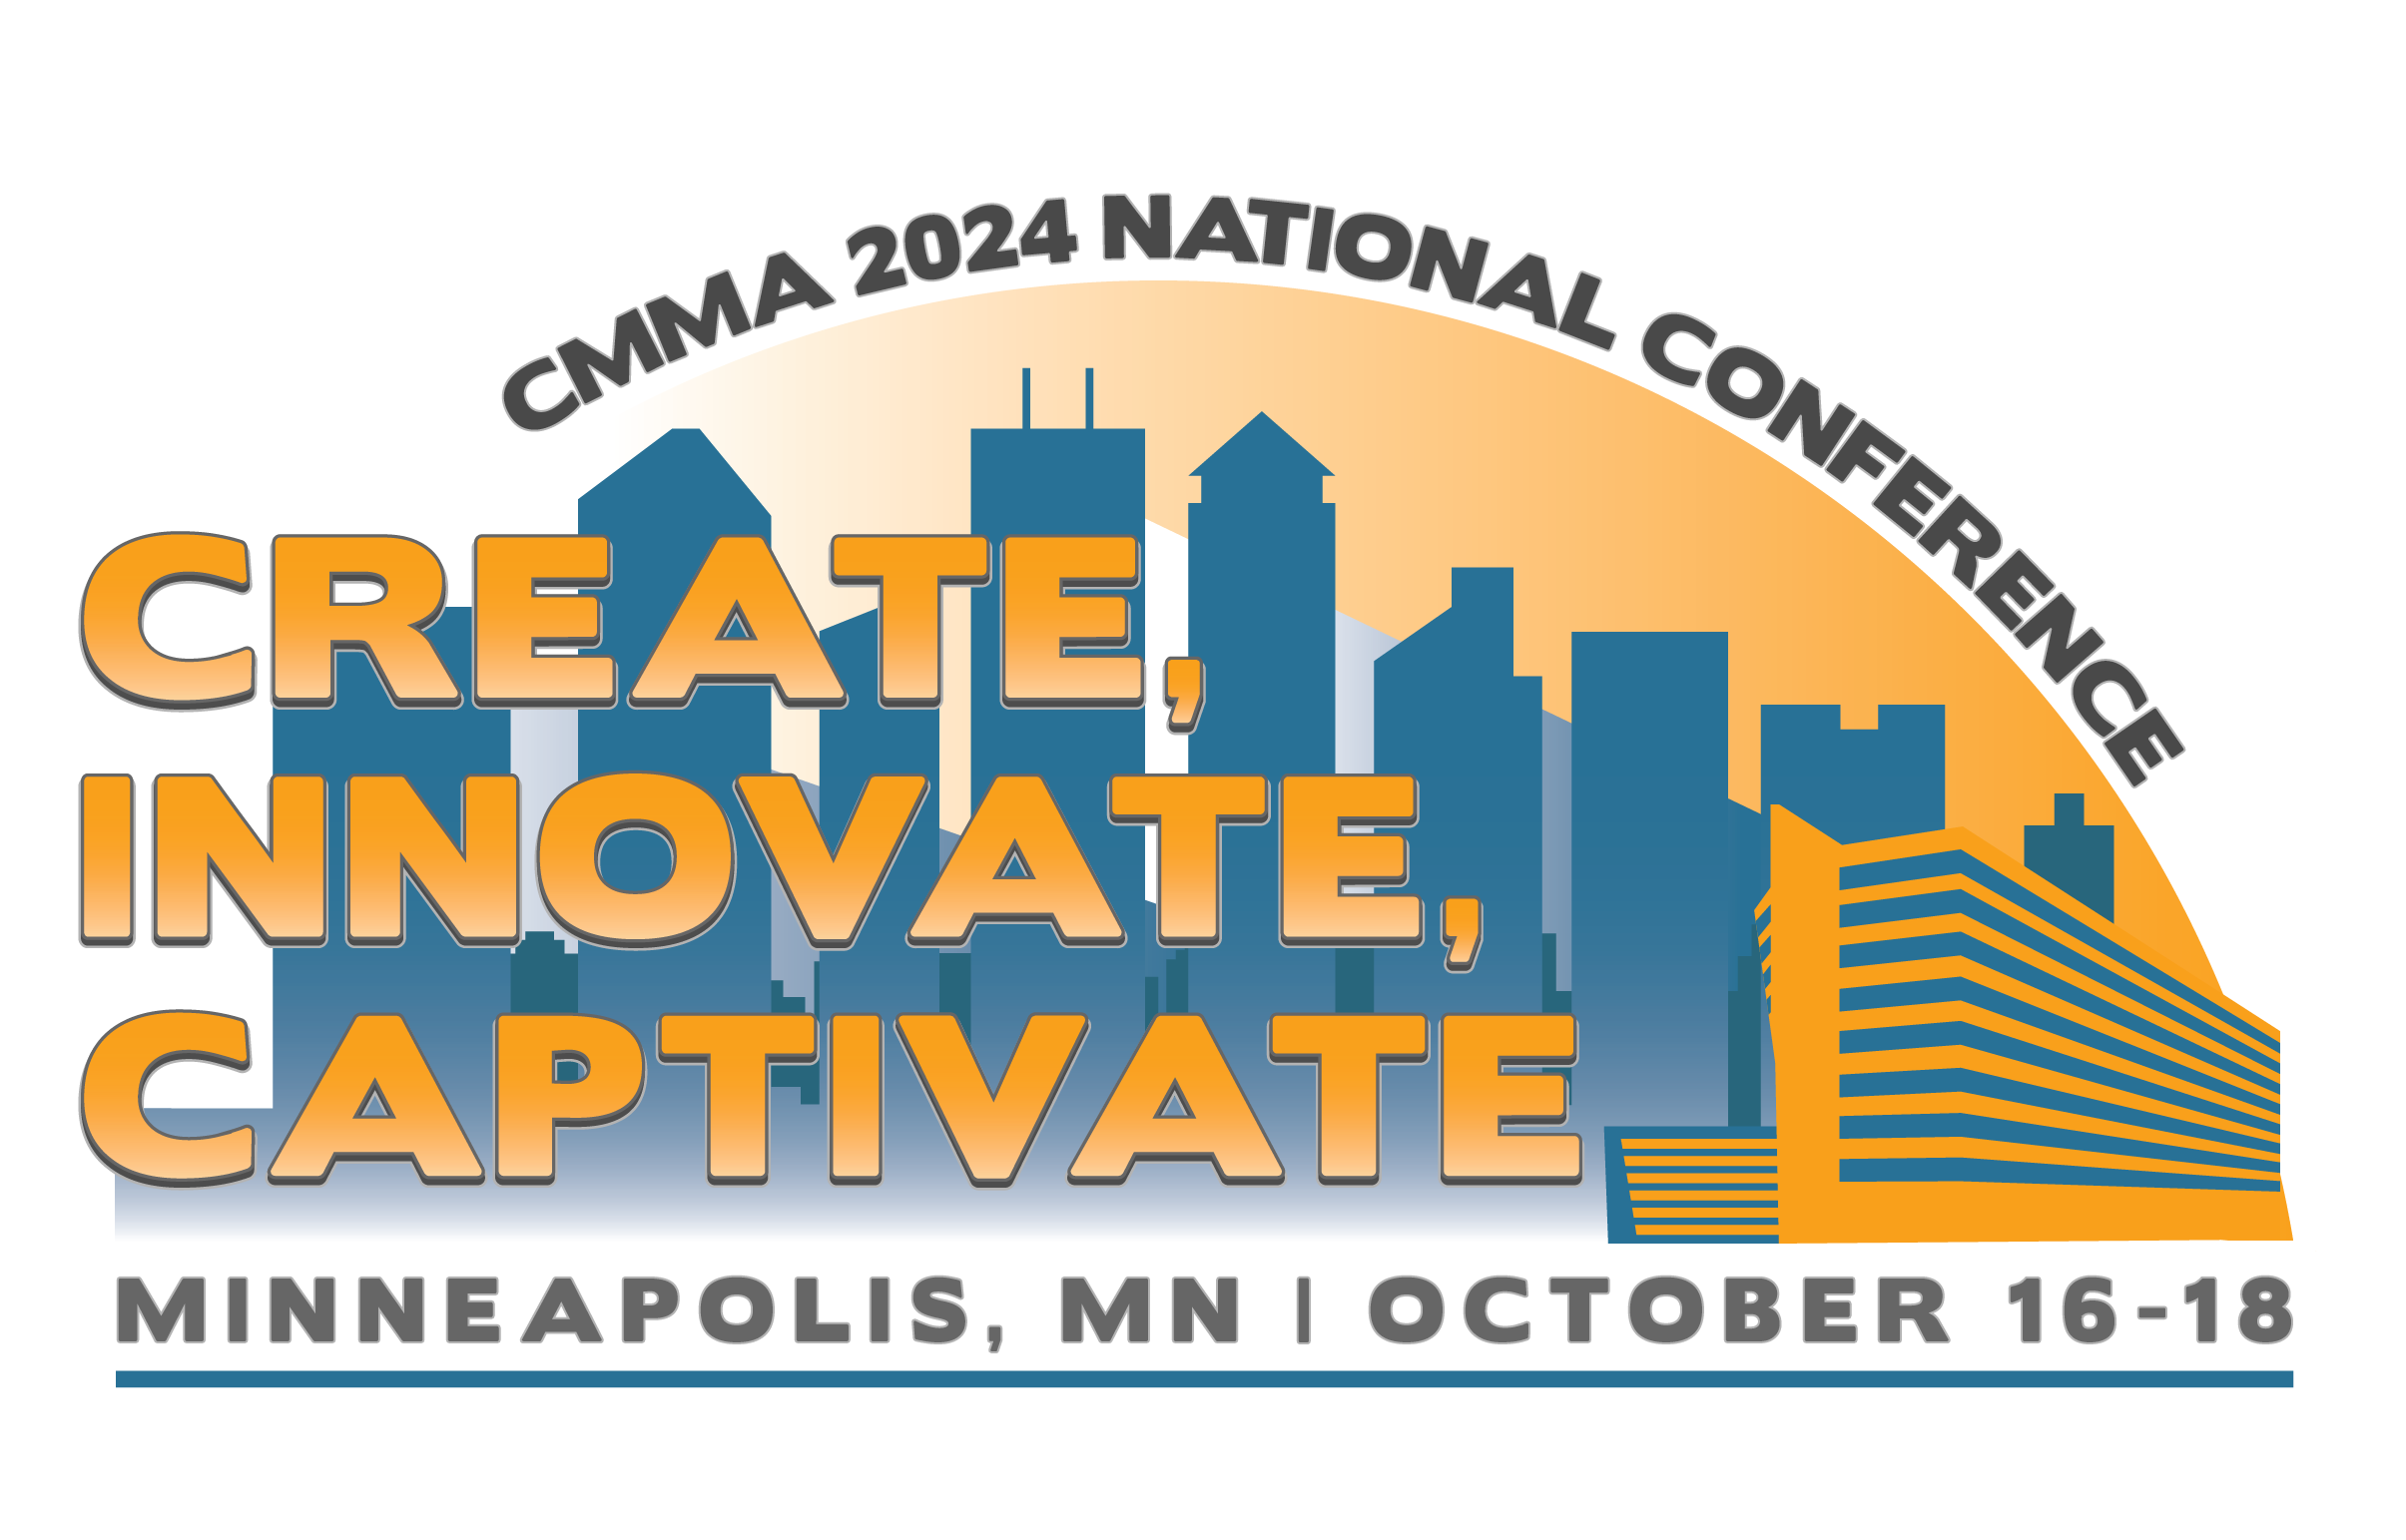 Logo for the CMMA 2024 National Conference in Minneapolis, MN, presented by the Communications Media Management Association, with the theme "Create, Innovate, Captivate" happening from October 16-18.